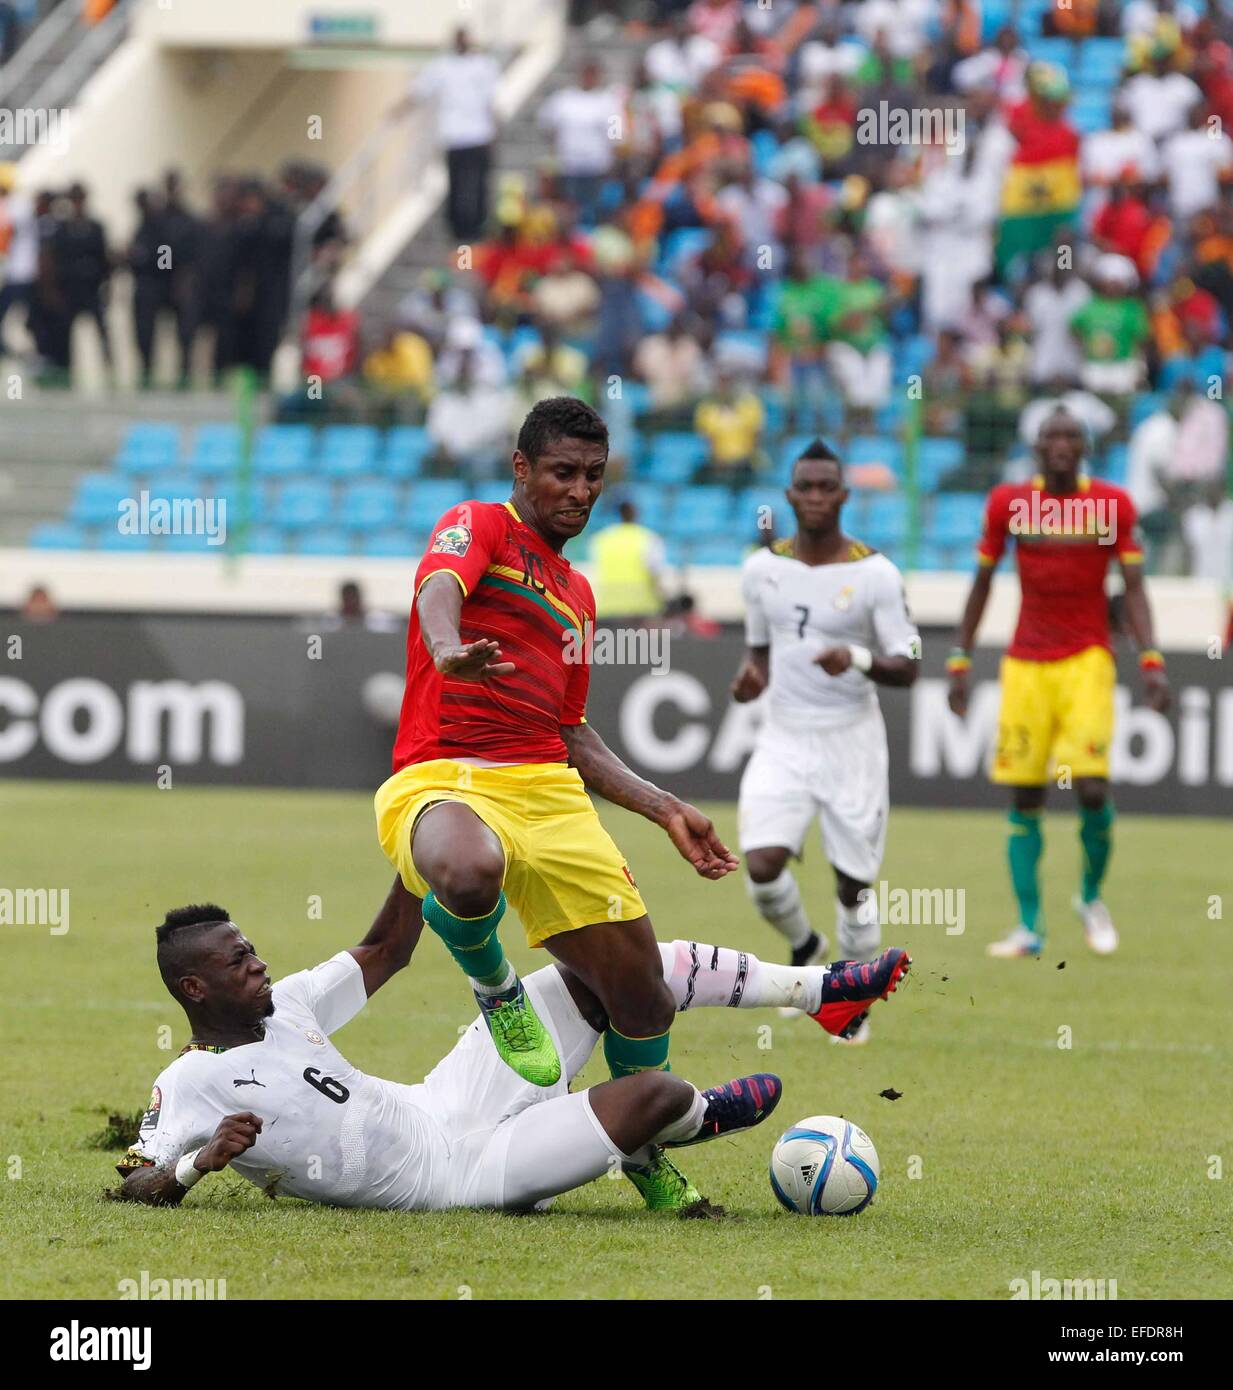 Malabo, Equatorial Guinea. 1st Feb, 2015. Kevin Constant of Guinea (R) vies with Afriyie Acquah of Ghana during a quarterfinal match of Africa Cup of Nations between Ghana and Guinea in Malabo, Equatorial Guinea, Feb. 1, 2015. Ghana won 3-0. Credit:  Li Jing/Xinhua/Alamy Live News Stock Photo